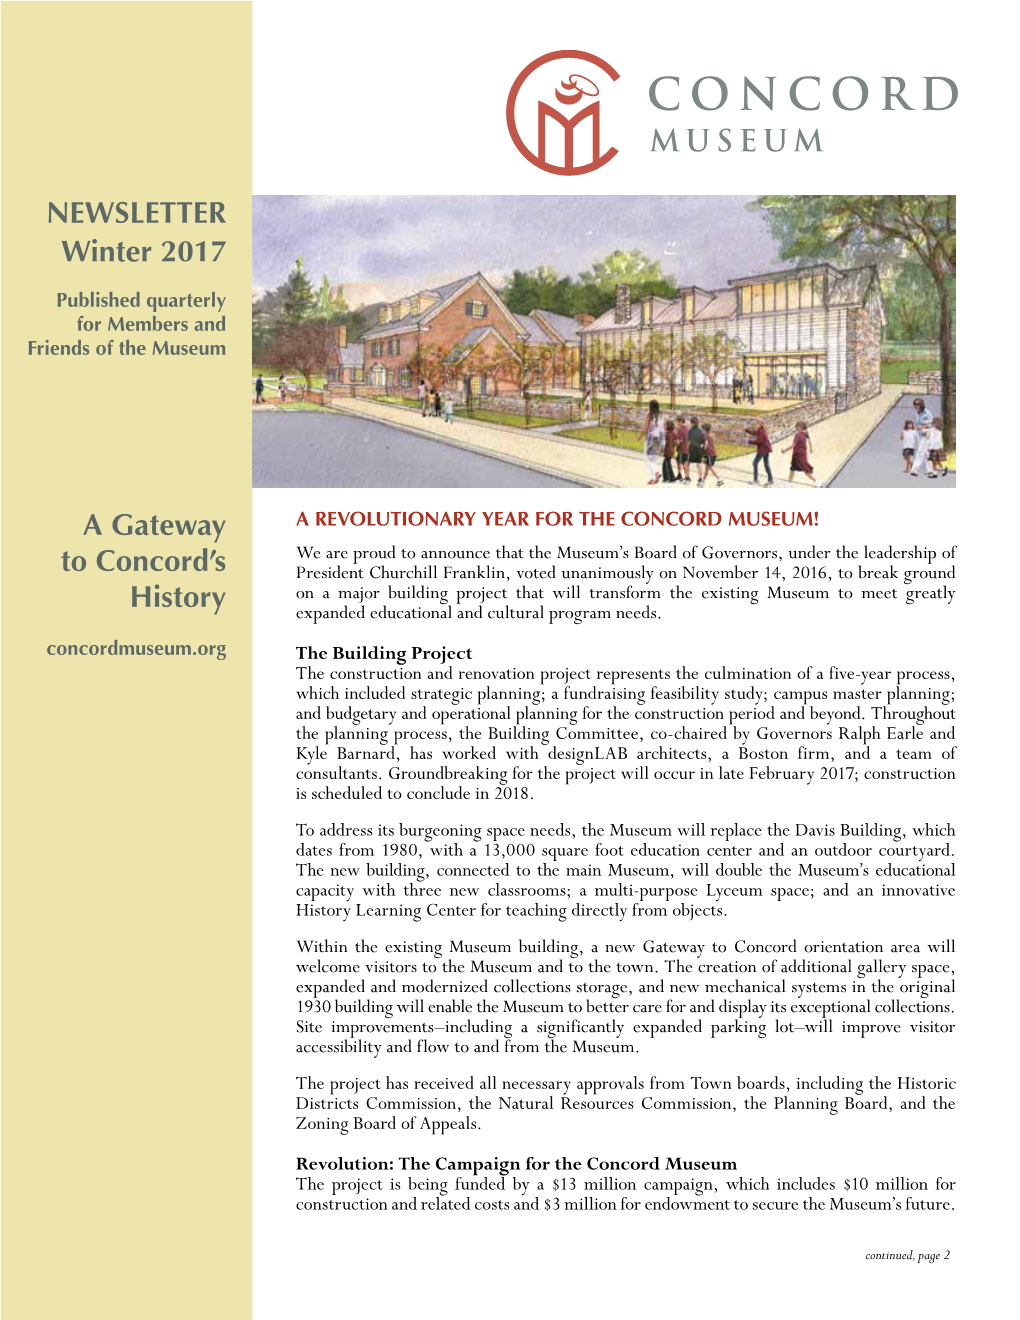 NEWSLETTER a Gateway to Concord's History Winter 2017